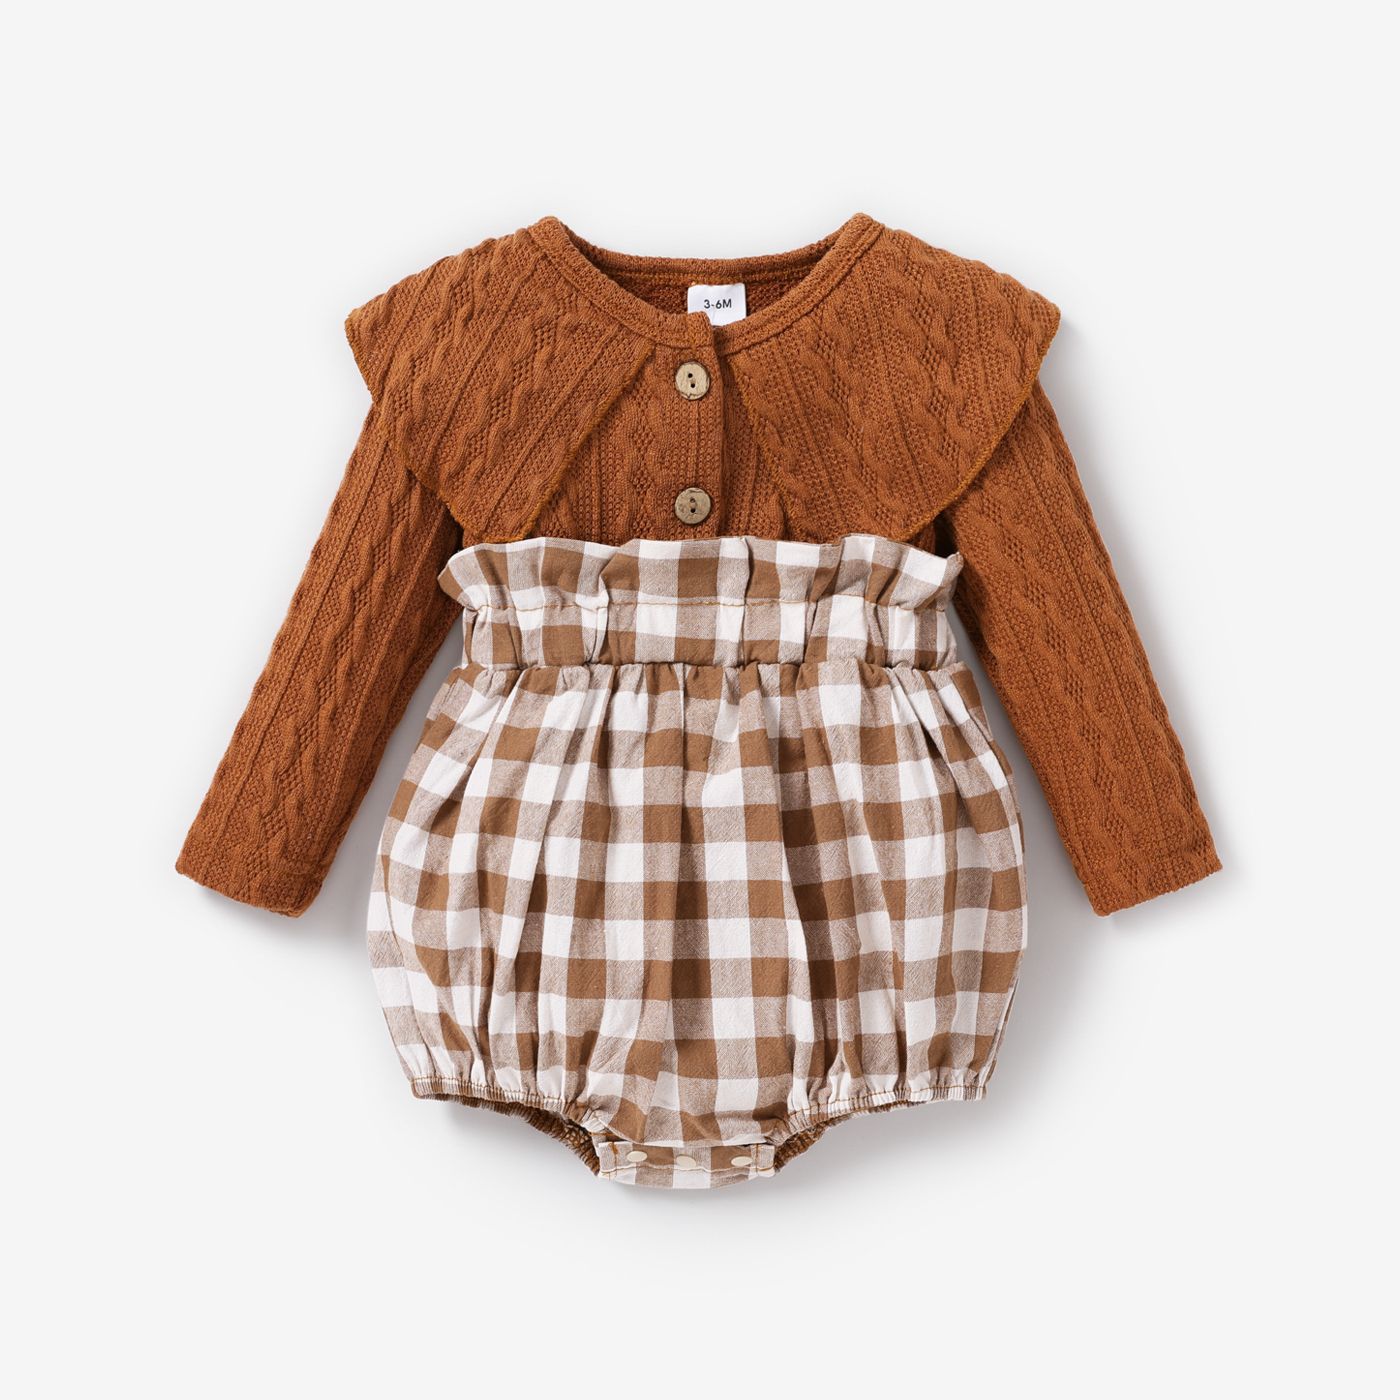 100% Cotton Knitted Long-sleeve Splicing Plaid Print Baby Romper